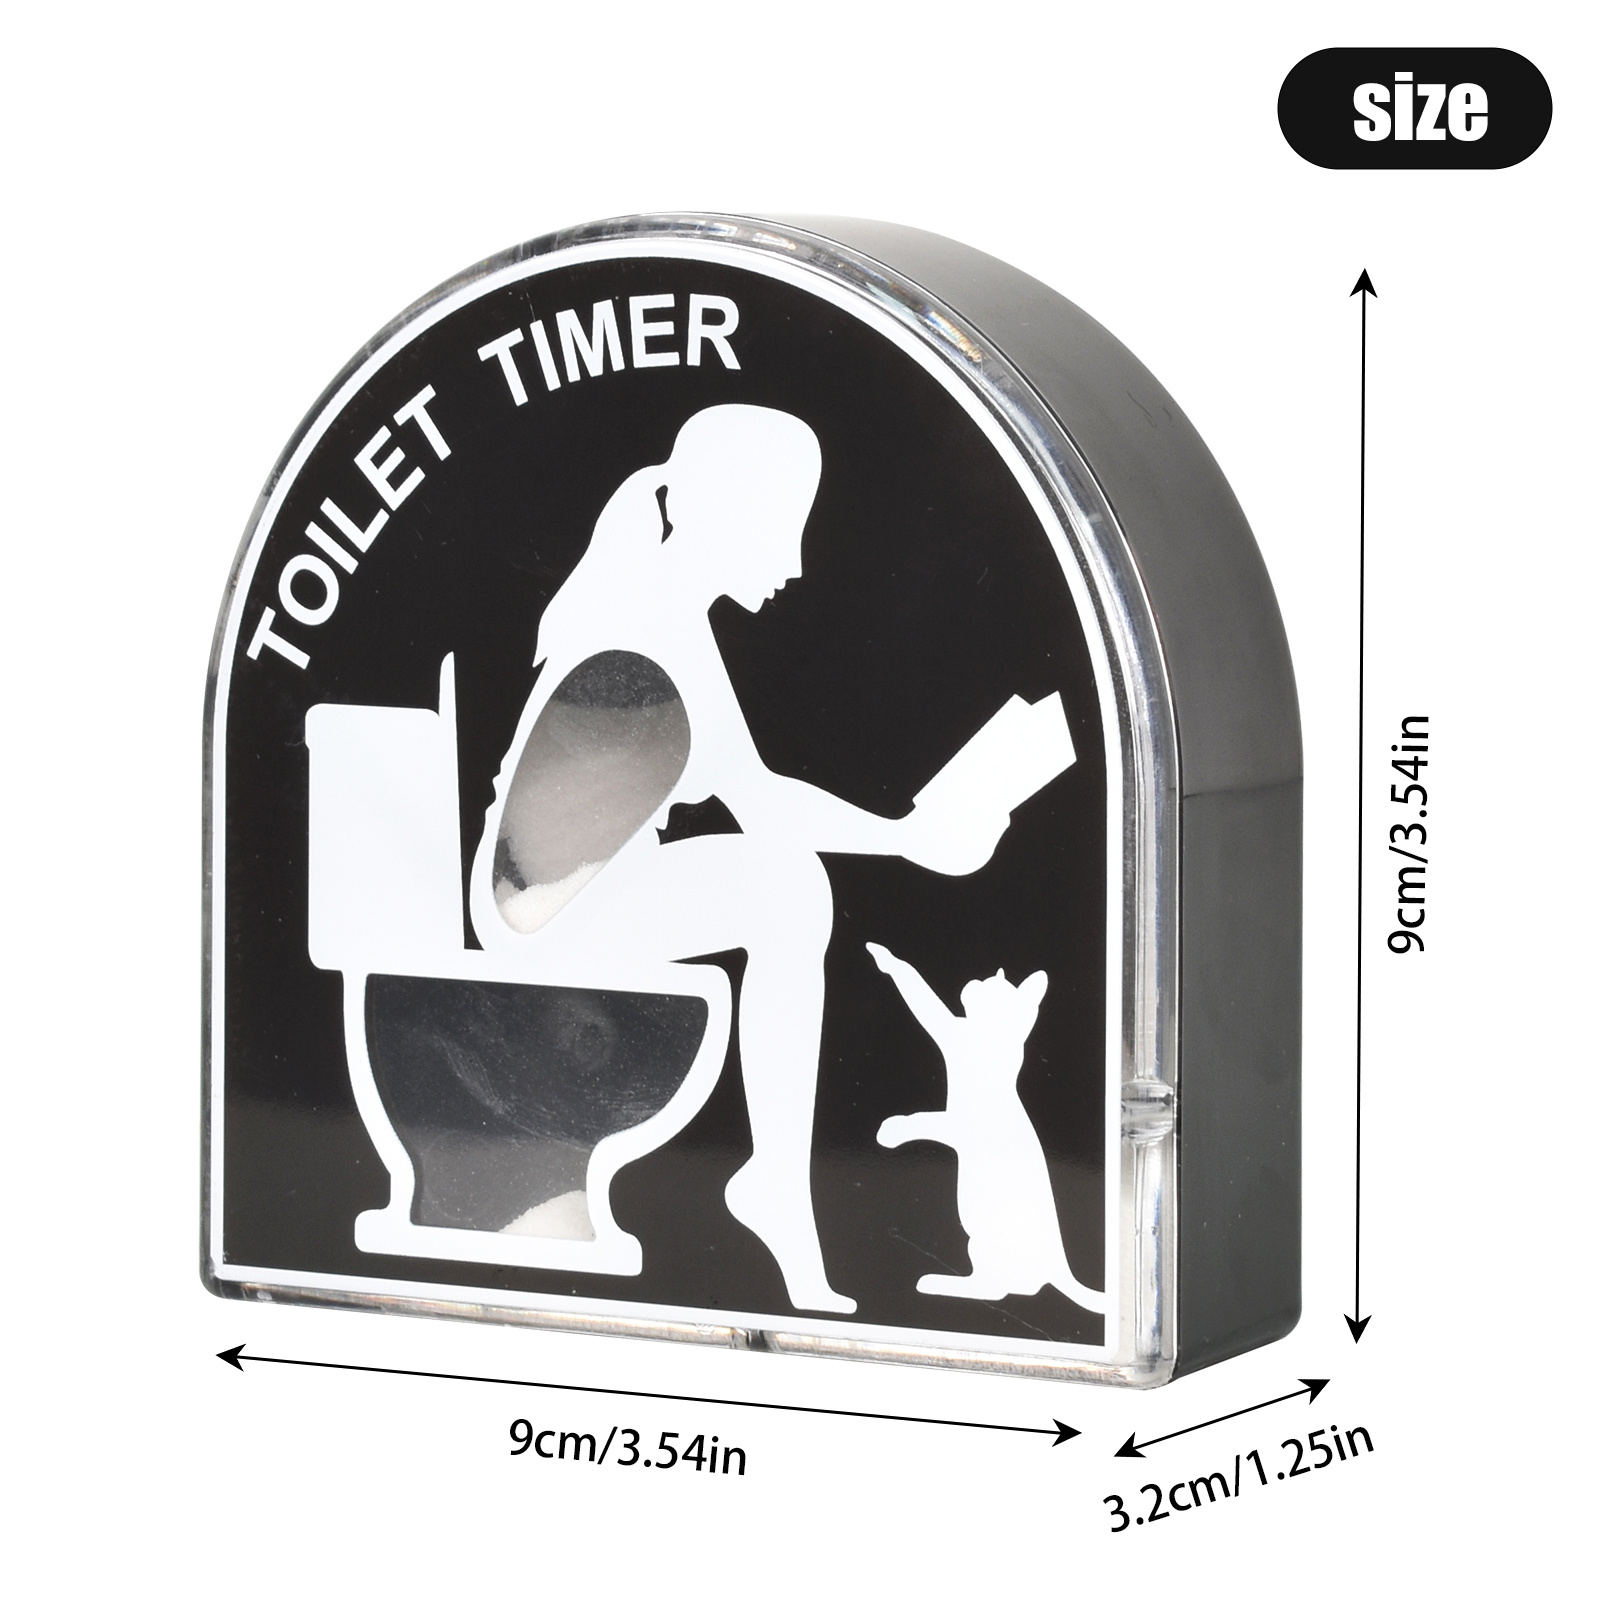 1pc, 5 Minutes Toilet Hourglass Timer, Toilet Timer, Kids Brush Timing  Tool, Creative Toilet Stool Hourglass, Home Garden Home Decor Toy, Funny  Gifts